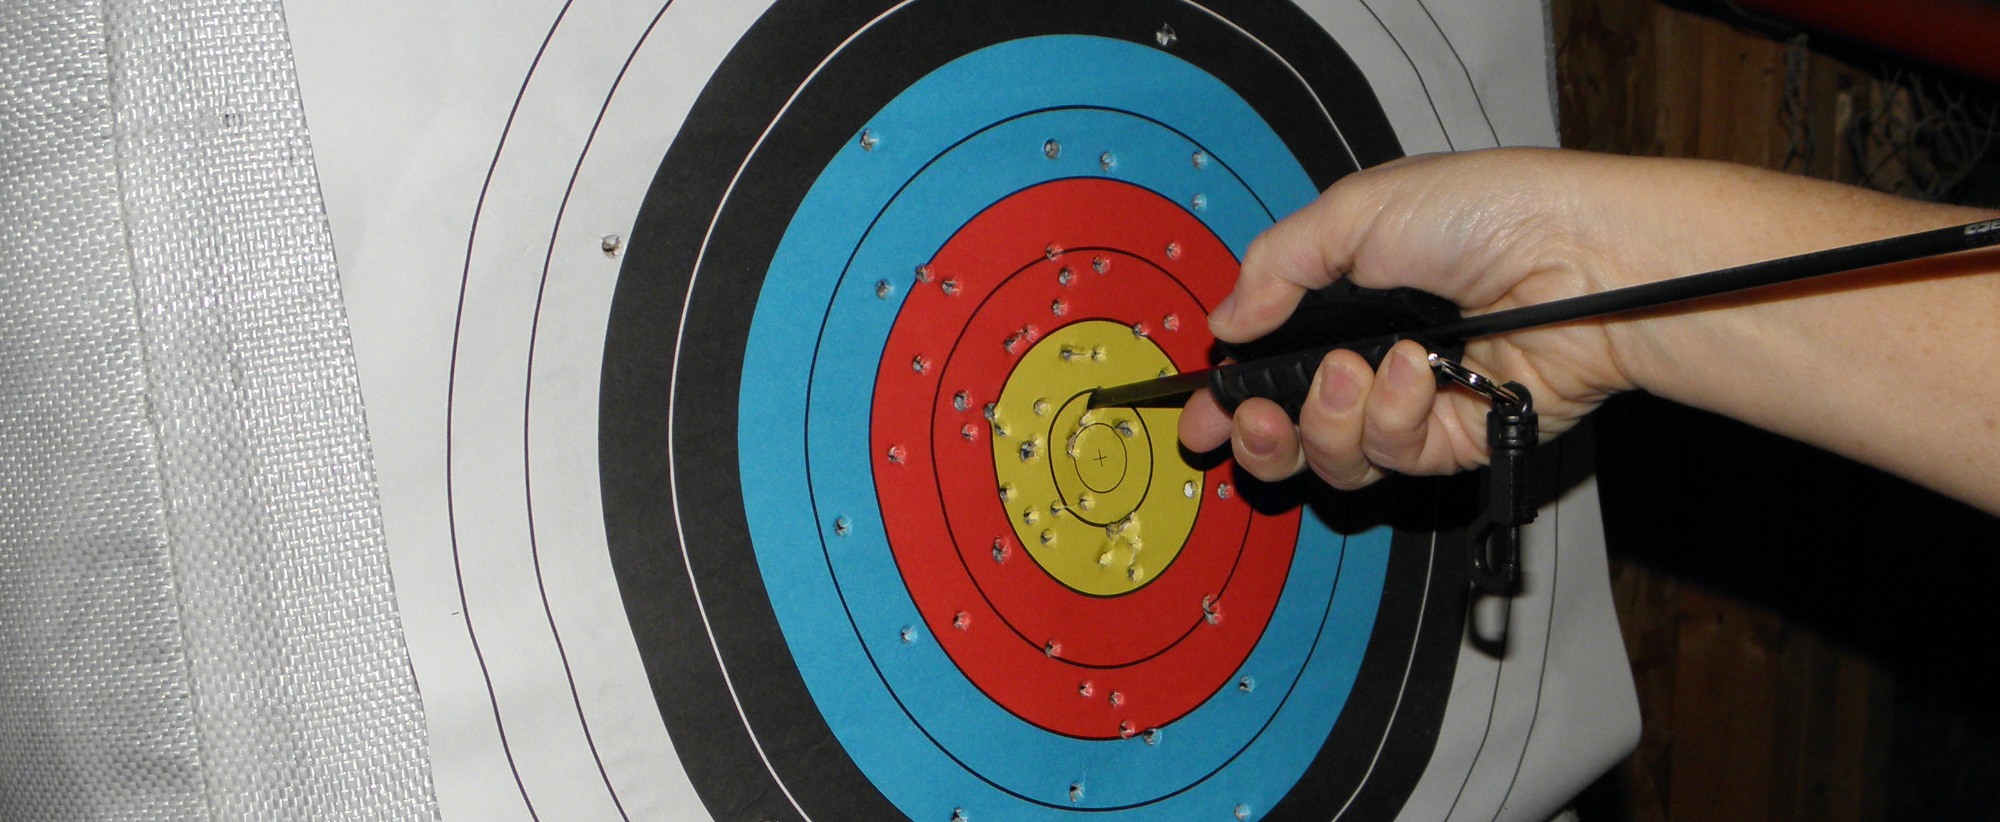 How to Get an Arrow Out of a Target? 